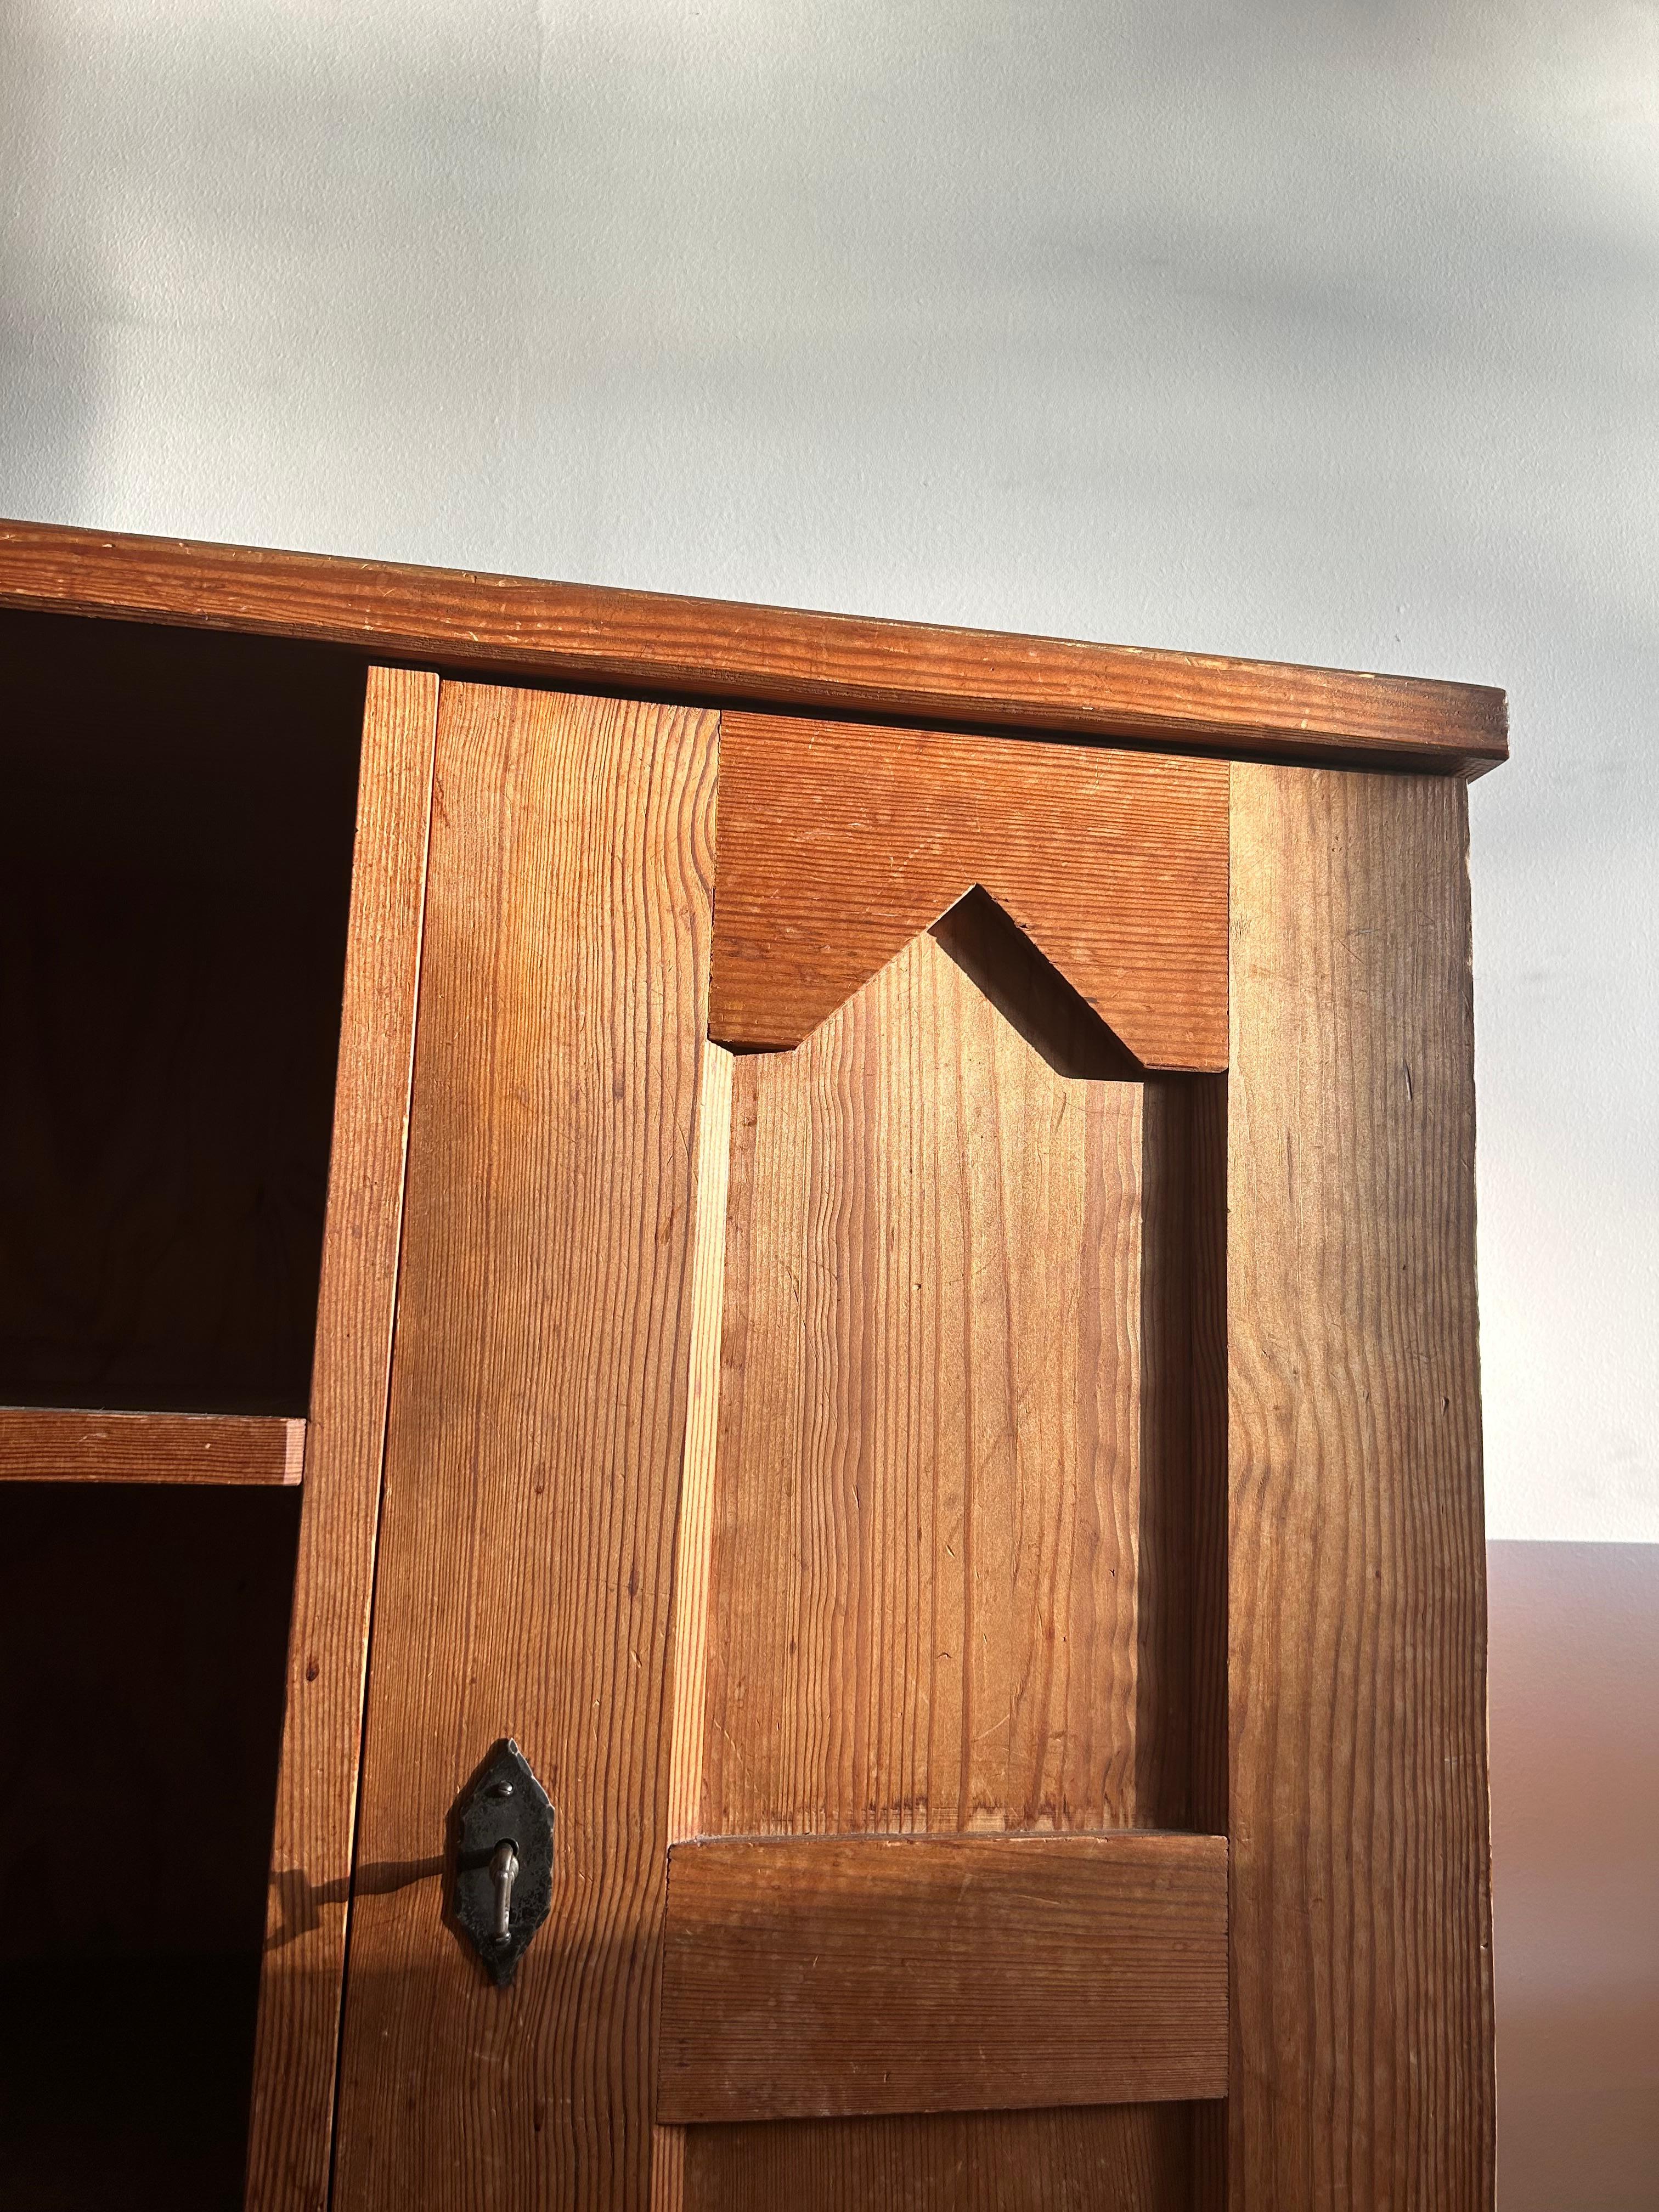 Rare and important Lovö shelf in acid stained pine designed by Axel Einar Hjorth for Nordiska Kompaniet in the 1930’s.

This shelf was made as a part of the Lovö series which was one of Axel Einar Hjorth’s series of cabin furniture.

Swedish